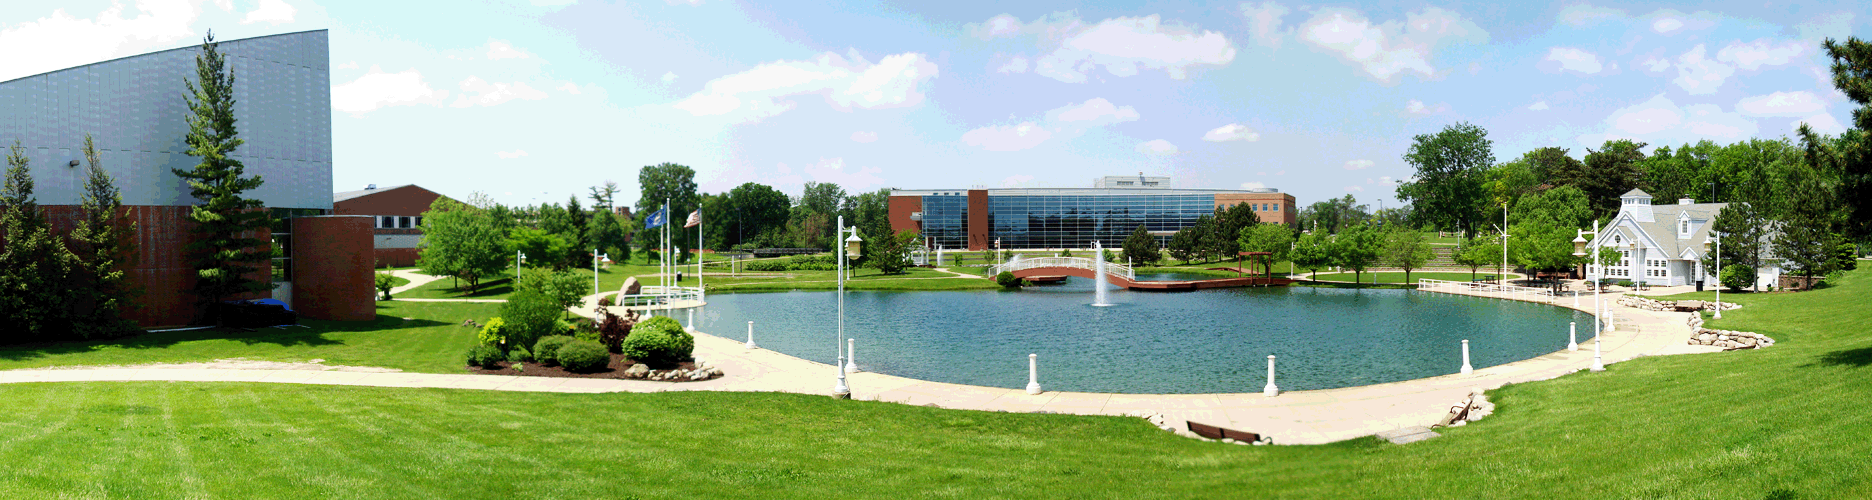 EMU-campus fountain and students center